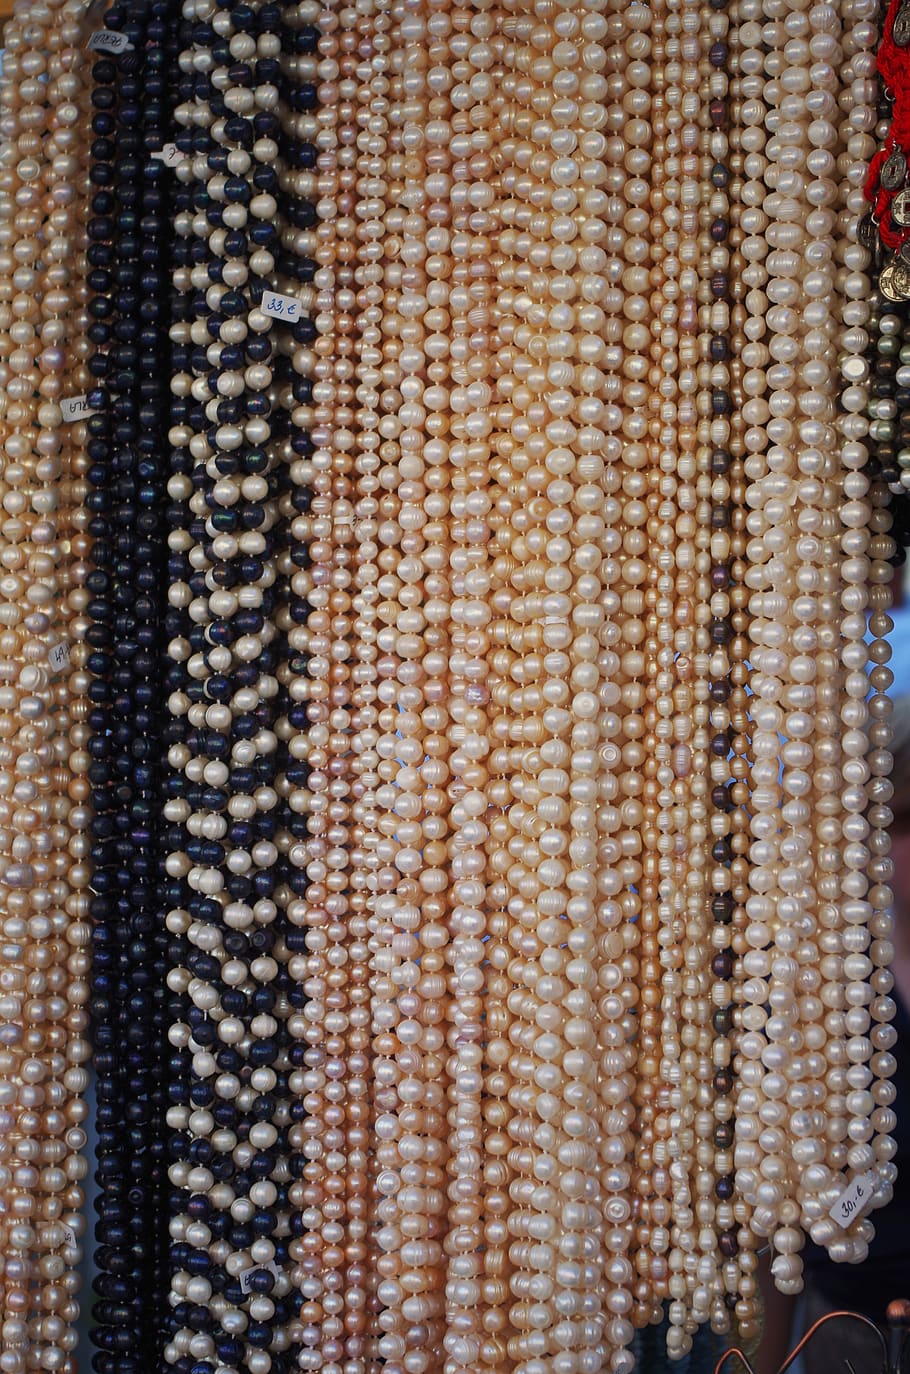 market, feast, slovakia, tradition, folklore, beads, backgrounds, corn, close-up, variation